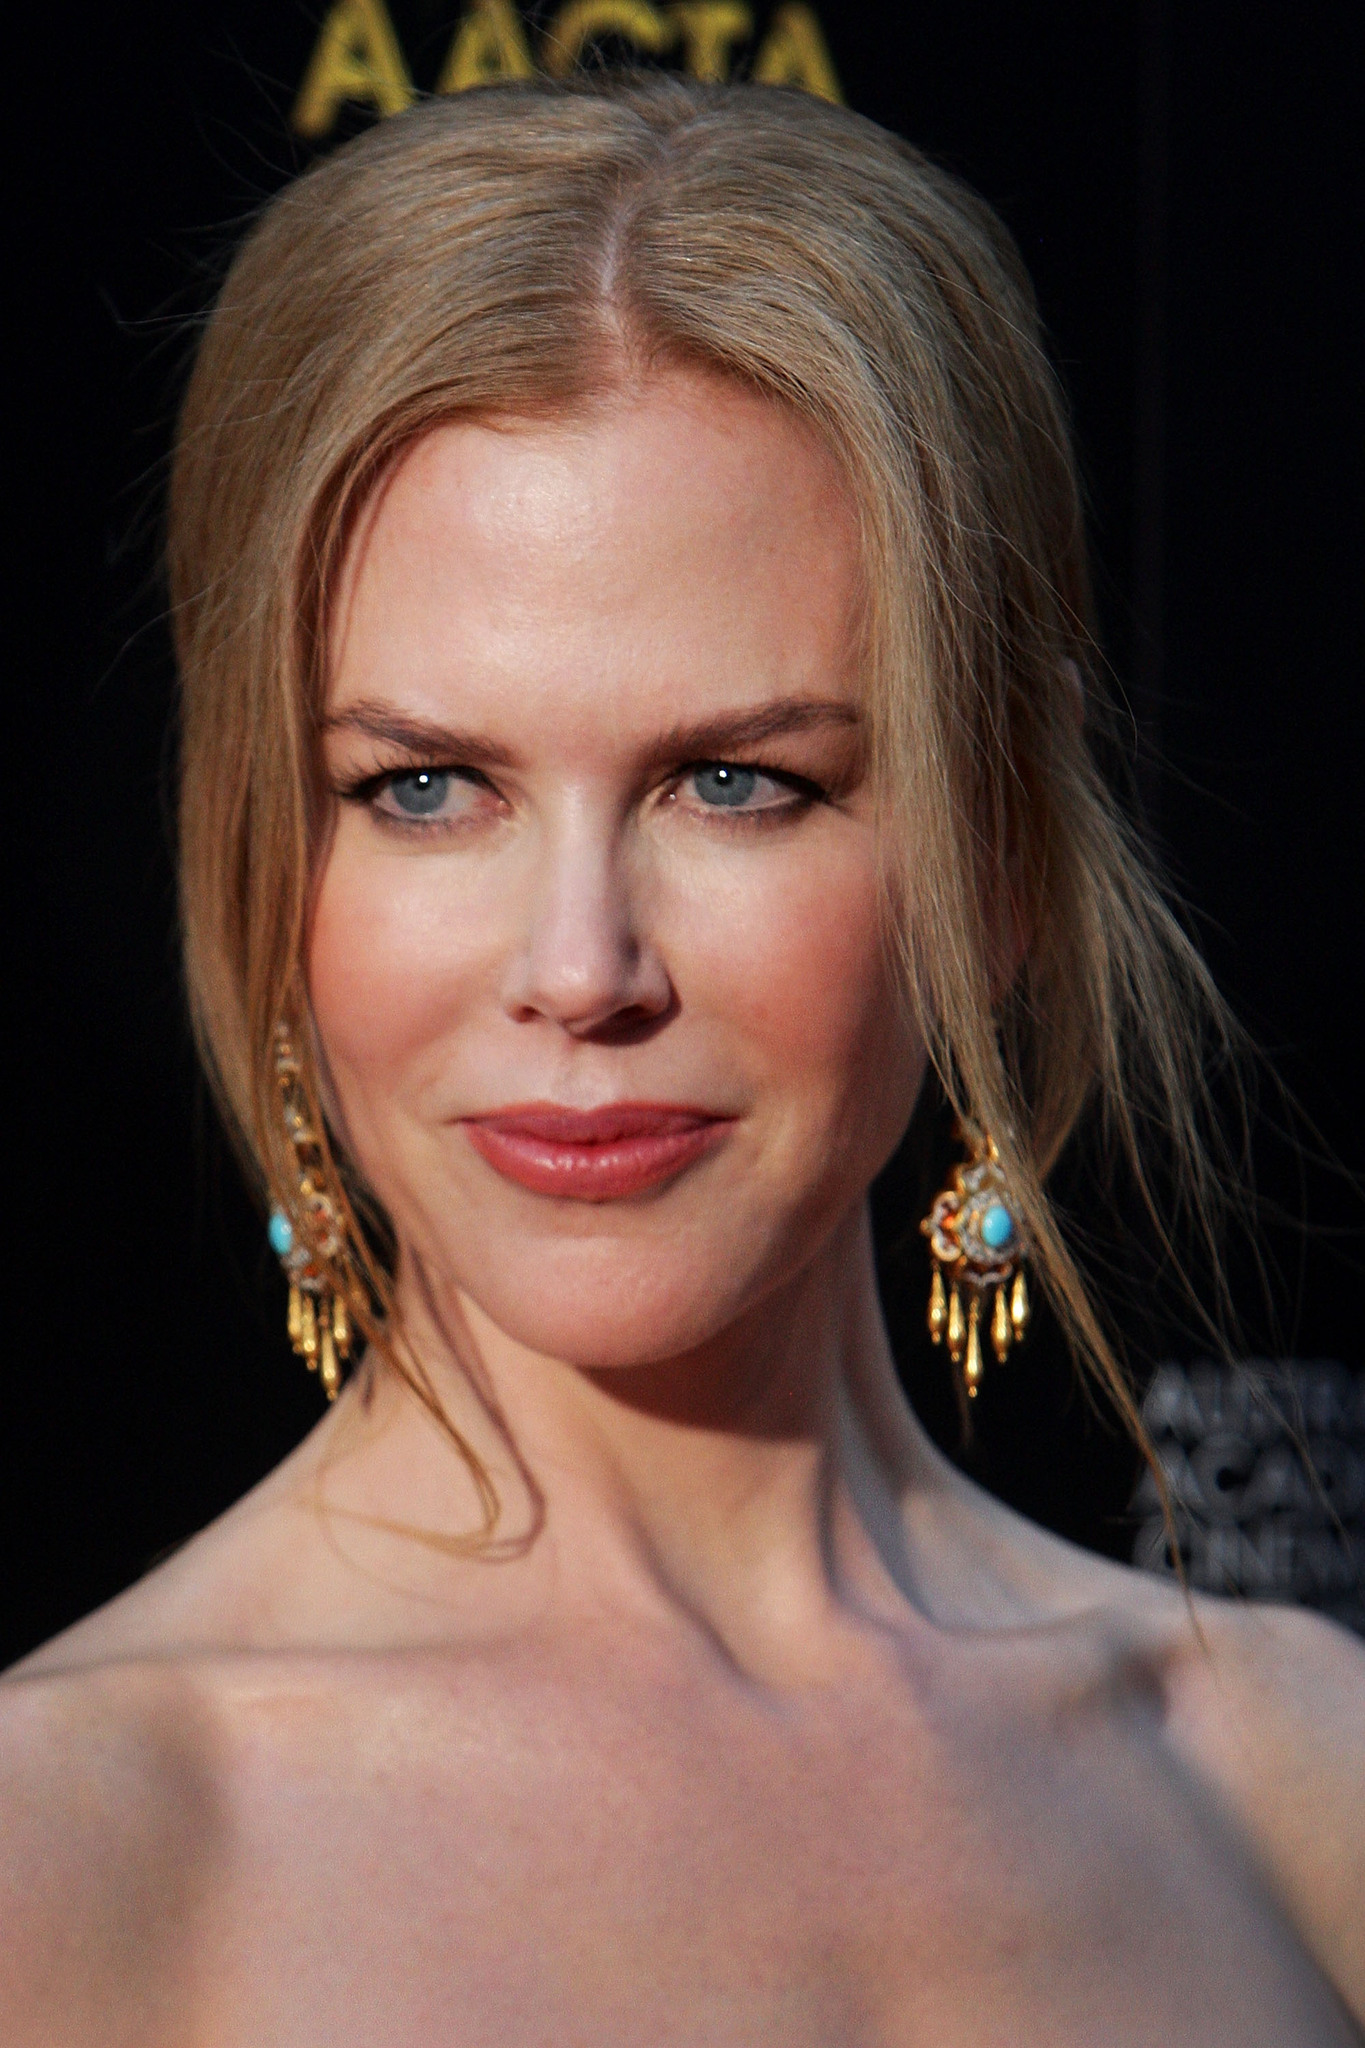 Nicole Kidman arrives at the 2nd Annual AACTA Awards at The Star on January 30, 2013 in Sydney, Australia.